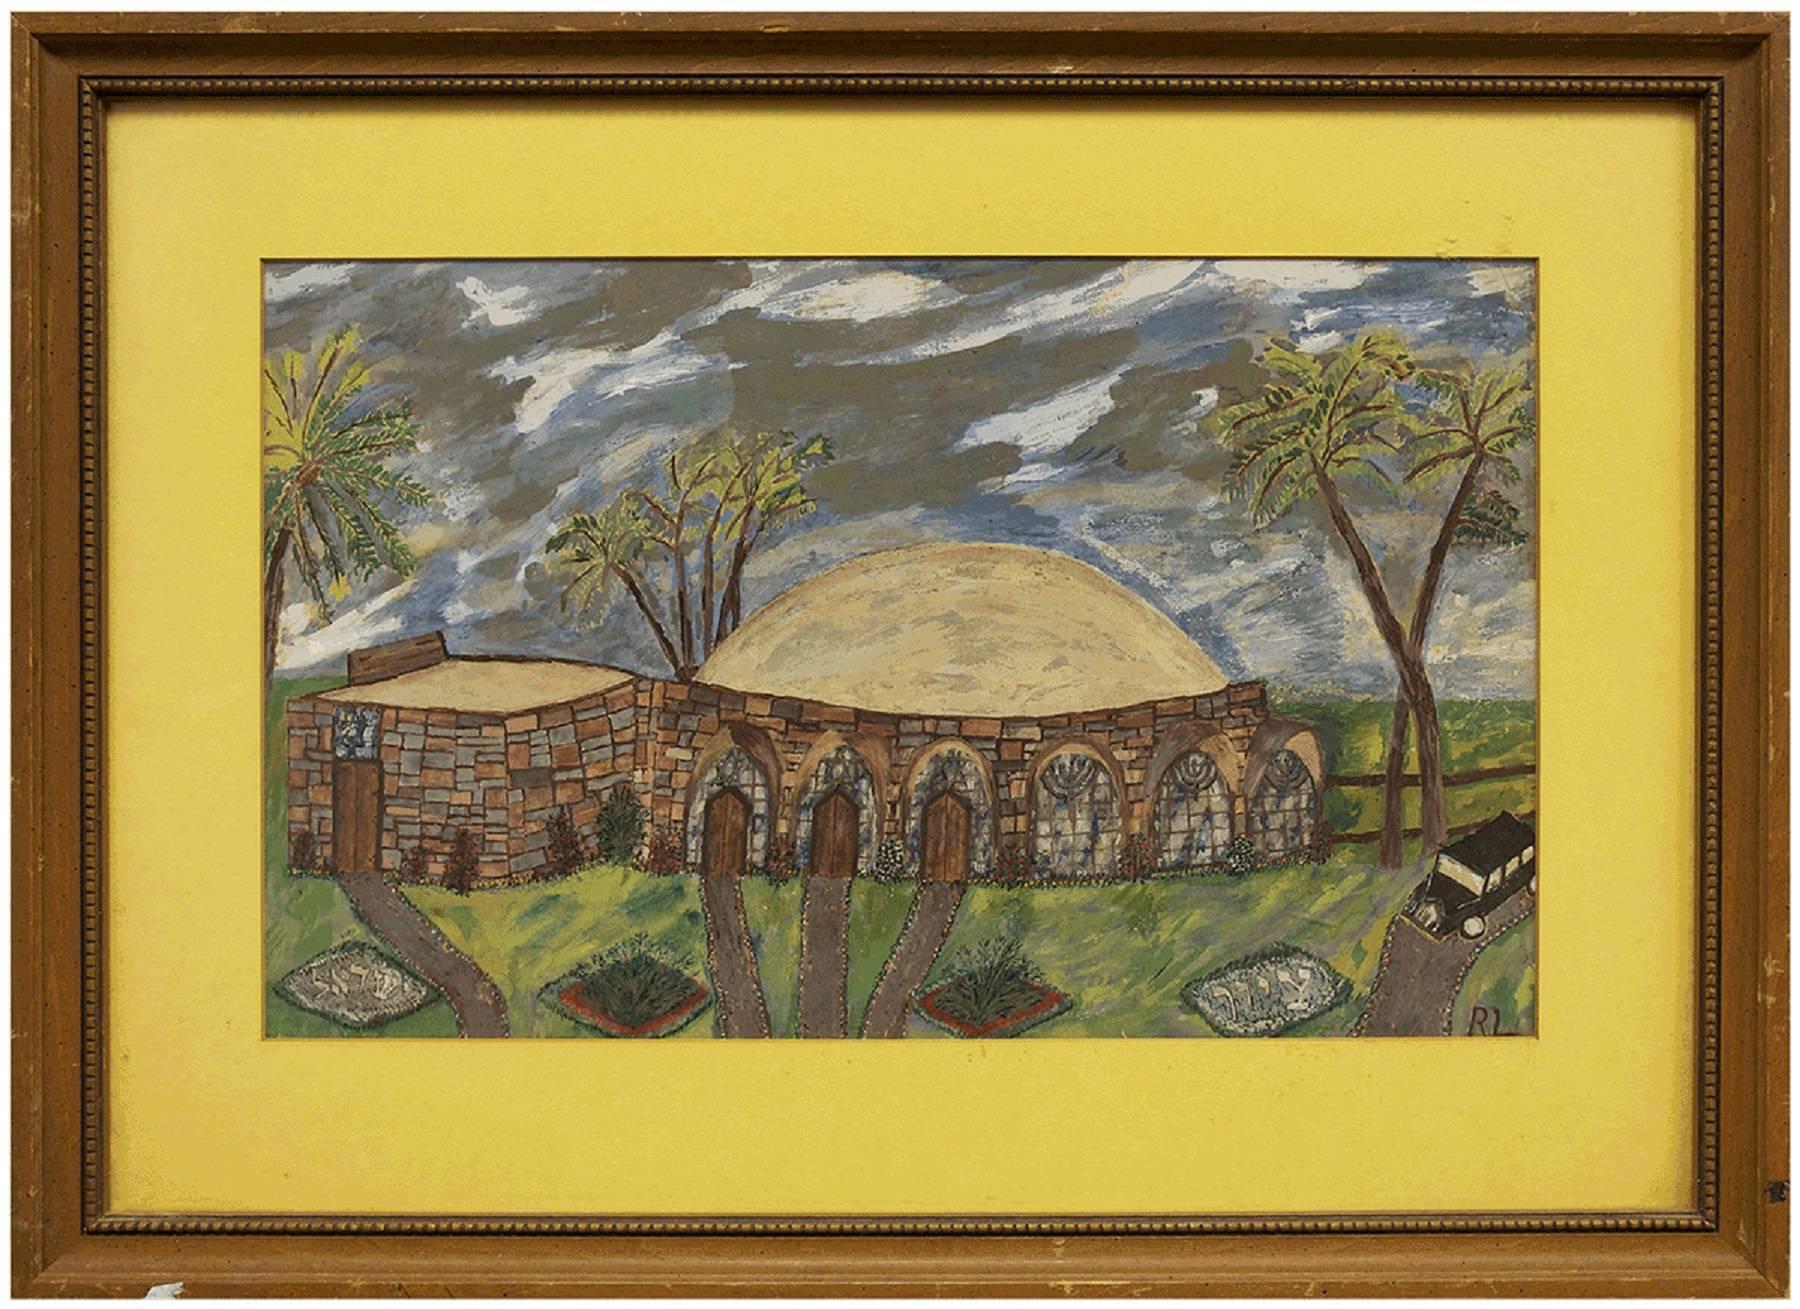 Rebecca Levy Landscape Painting - Outsider Art Judaica Synagogue or Tomb in Israel